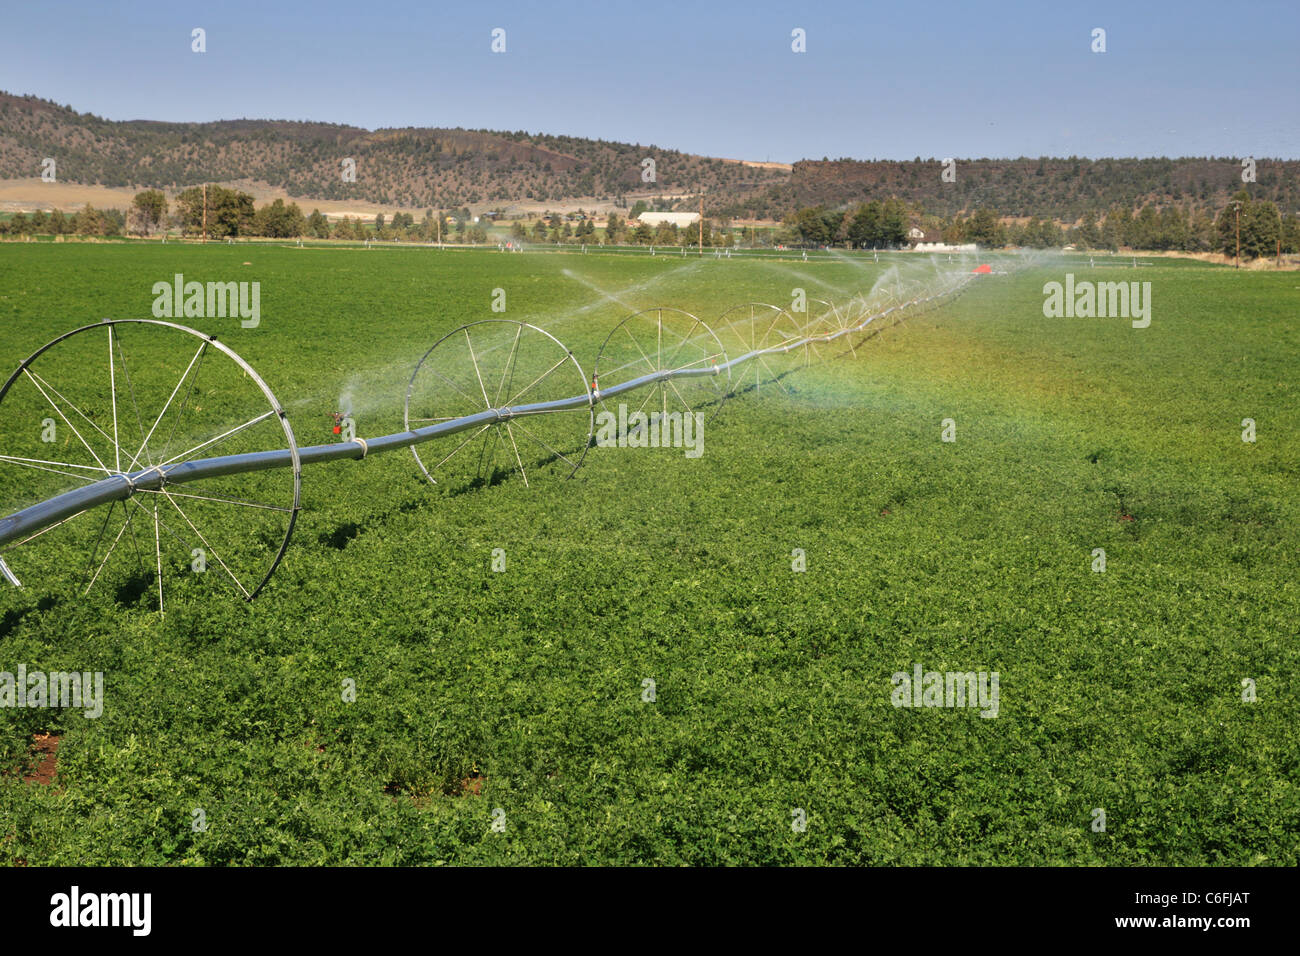 wheel line irrigation system in a Central Oregon alfalfa field Stock Photo